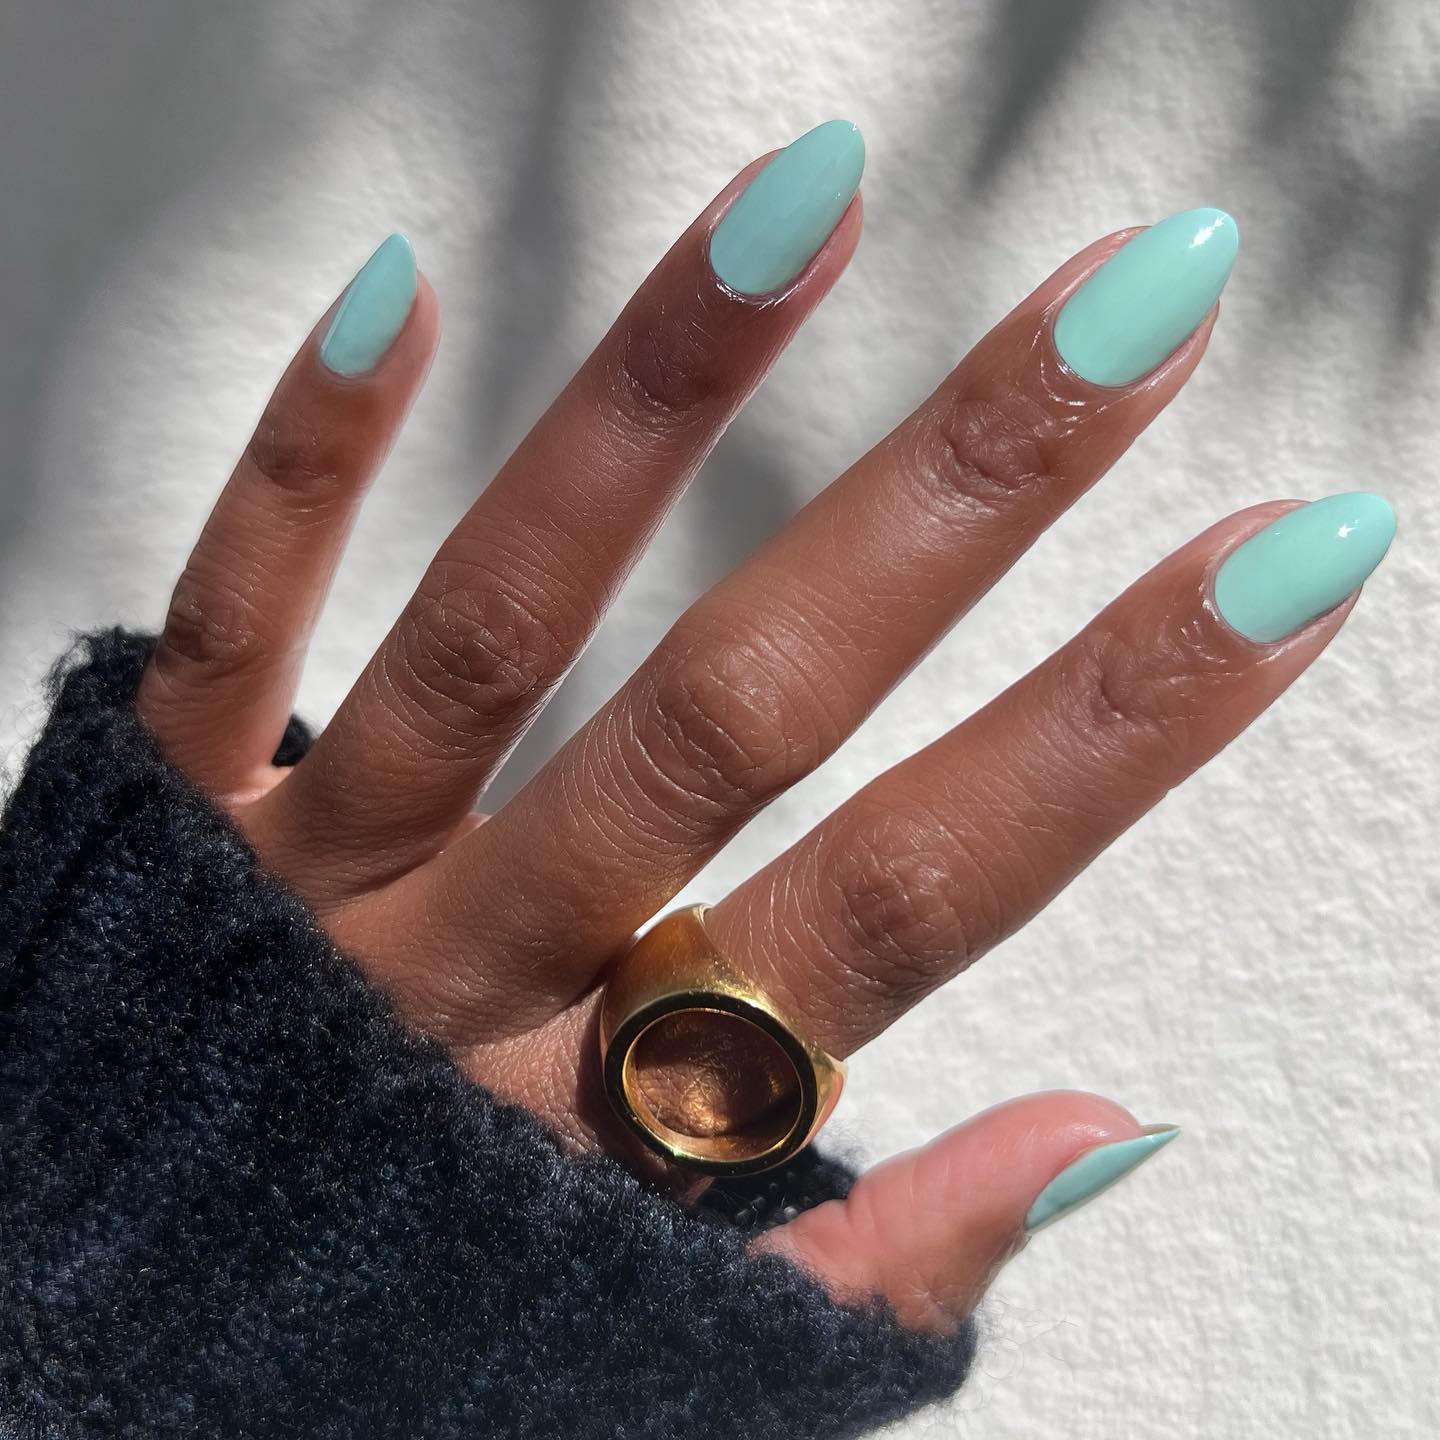 Found: The 10 Best Nail Polish Brands of 2023 | Who What Wear